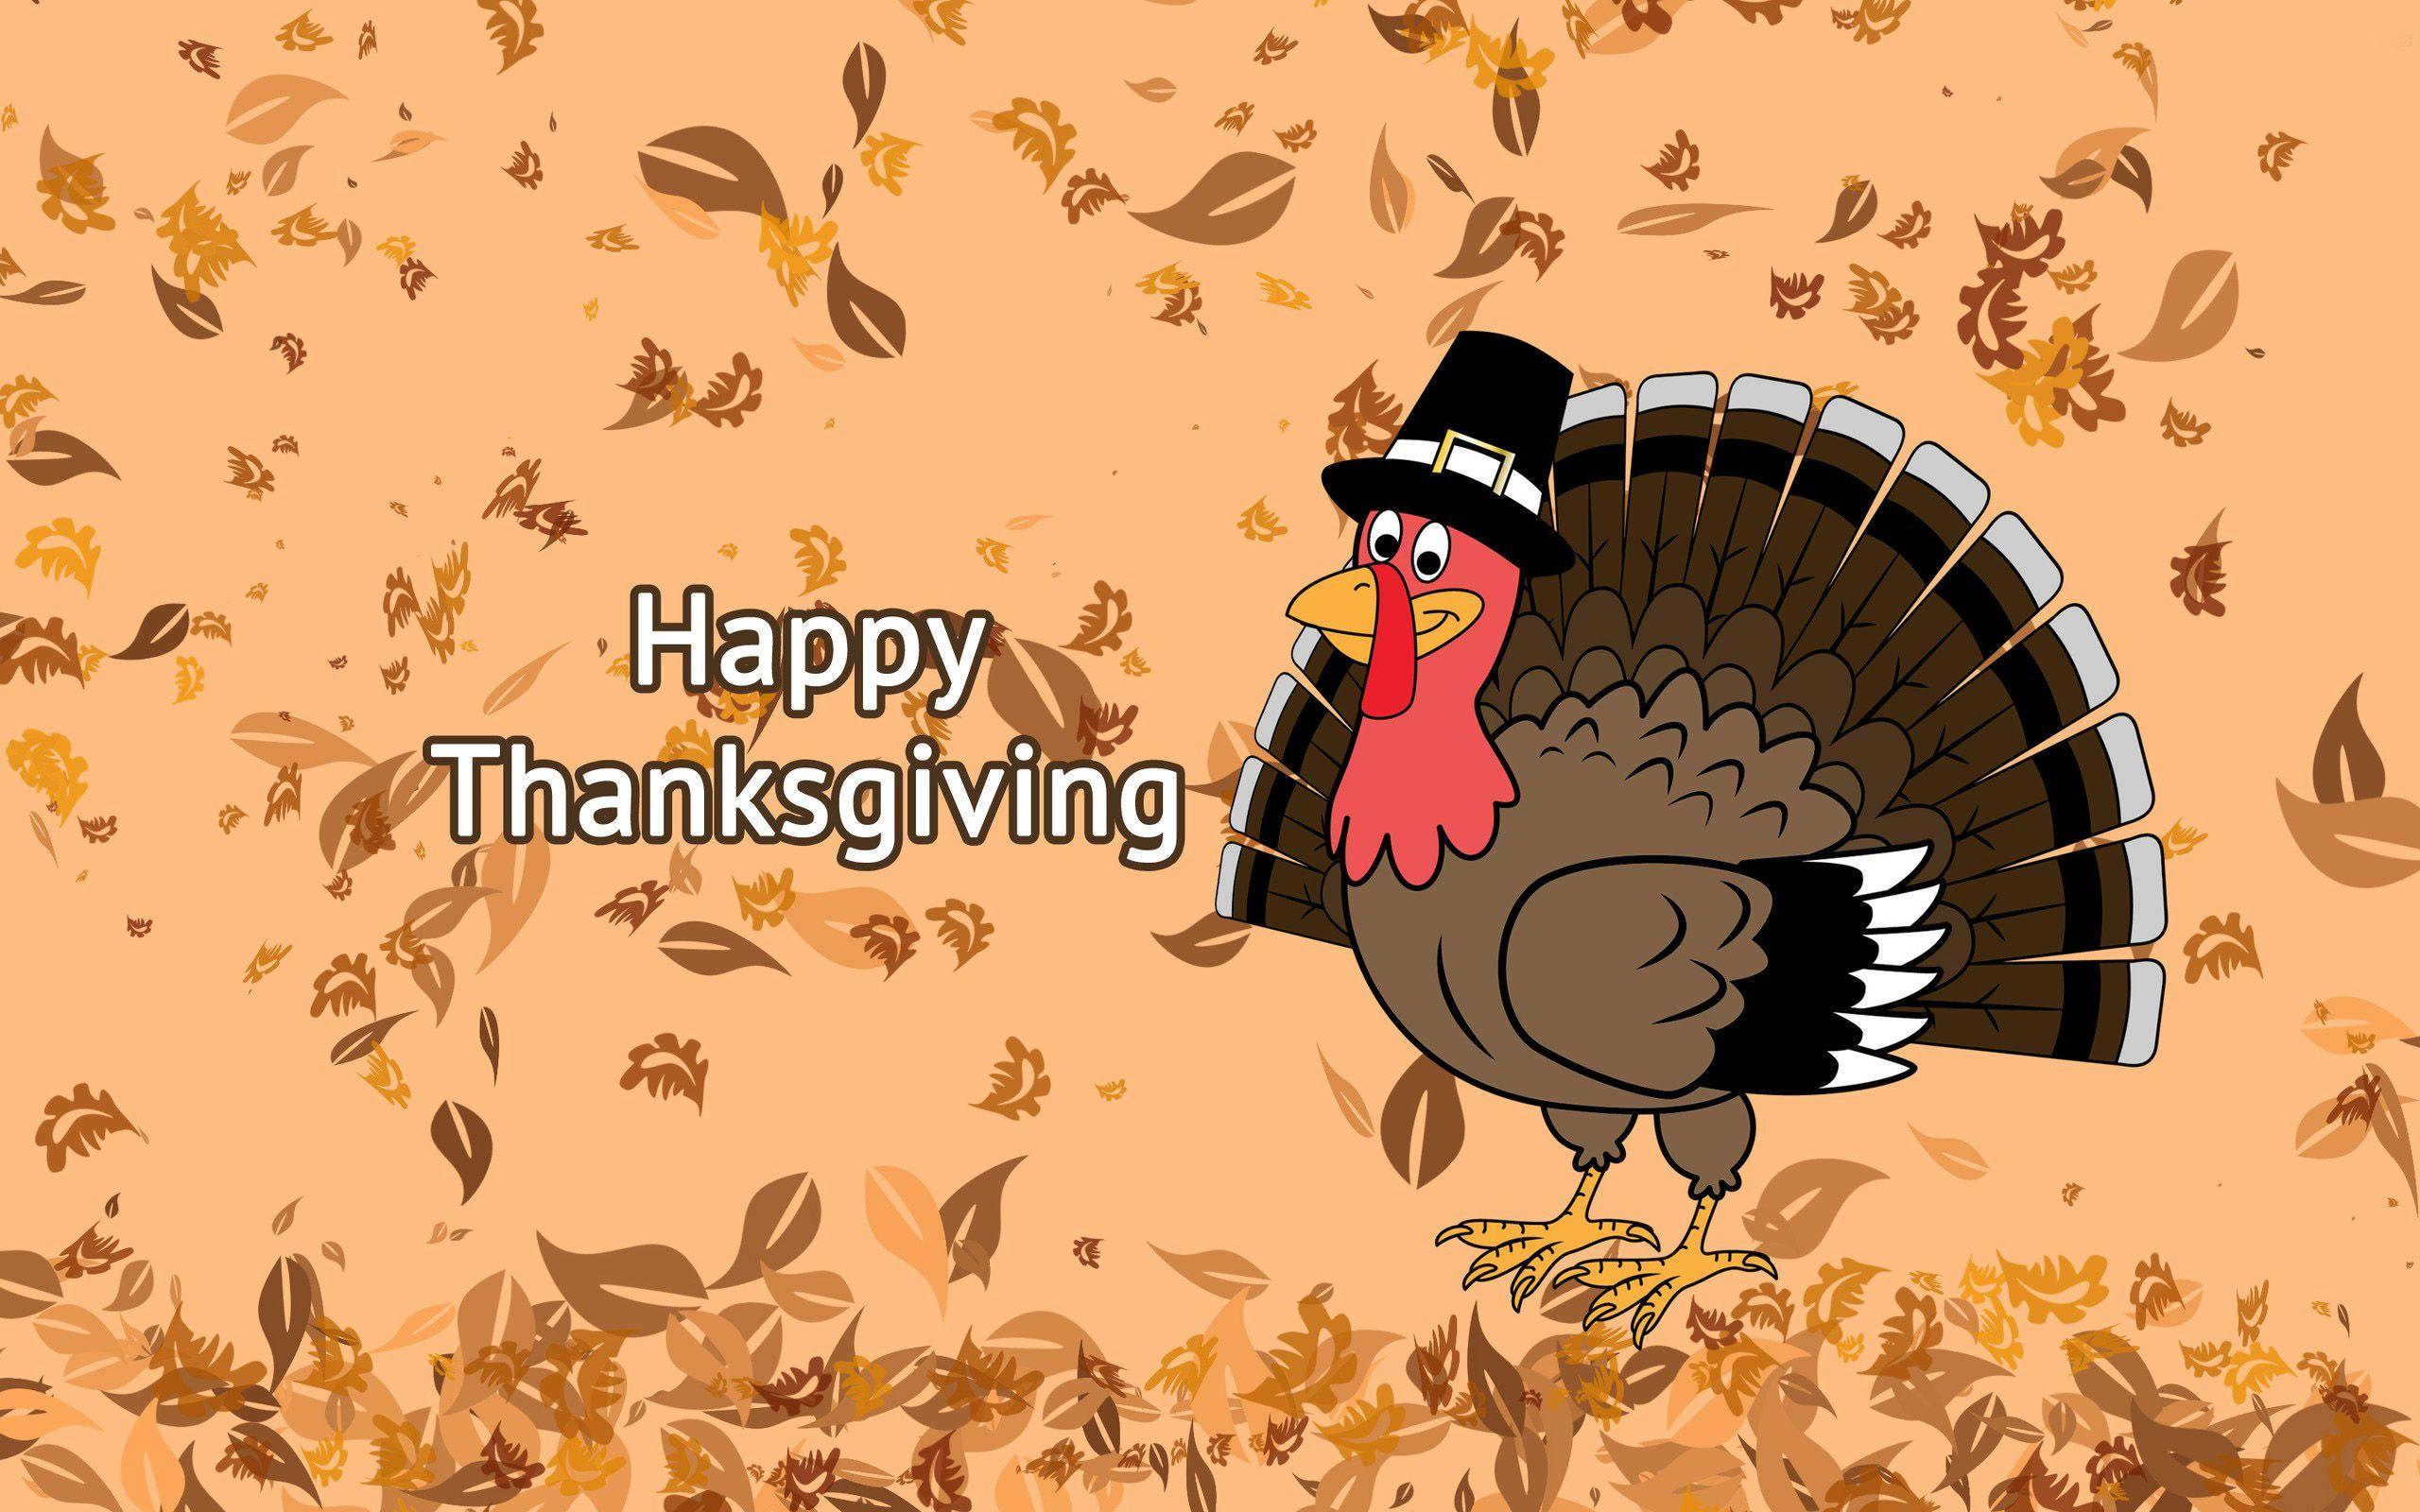 Happy Thanksgiving Day Falling Leaves On Turkey Background HD